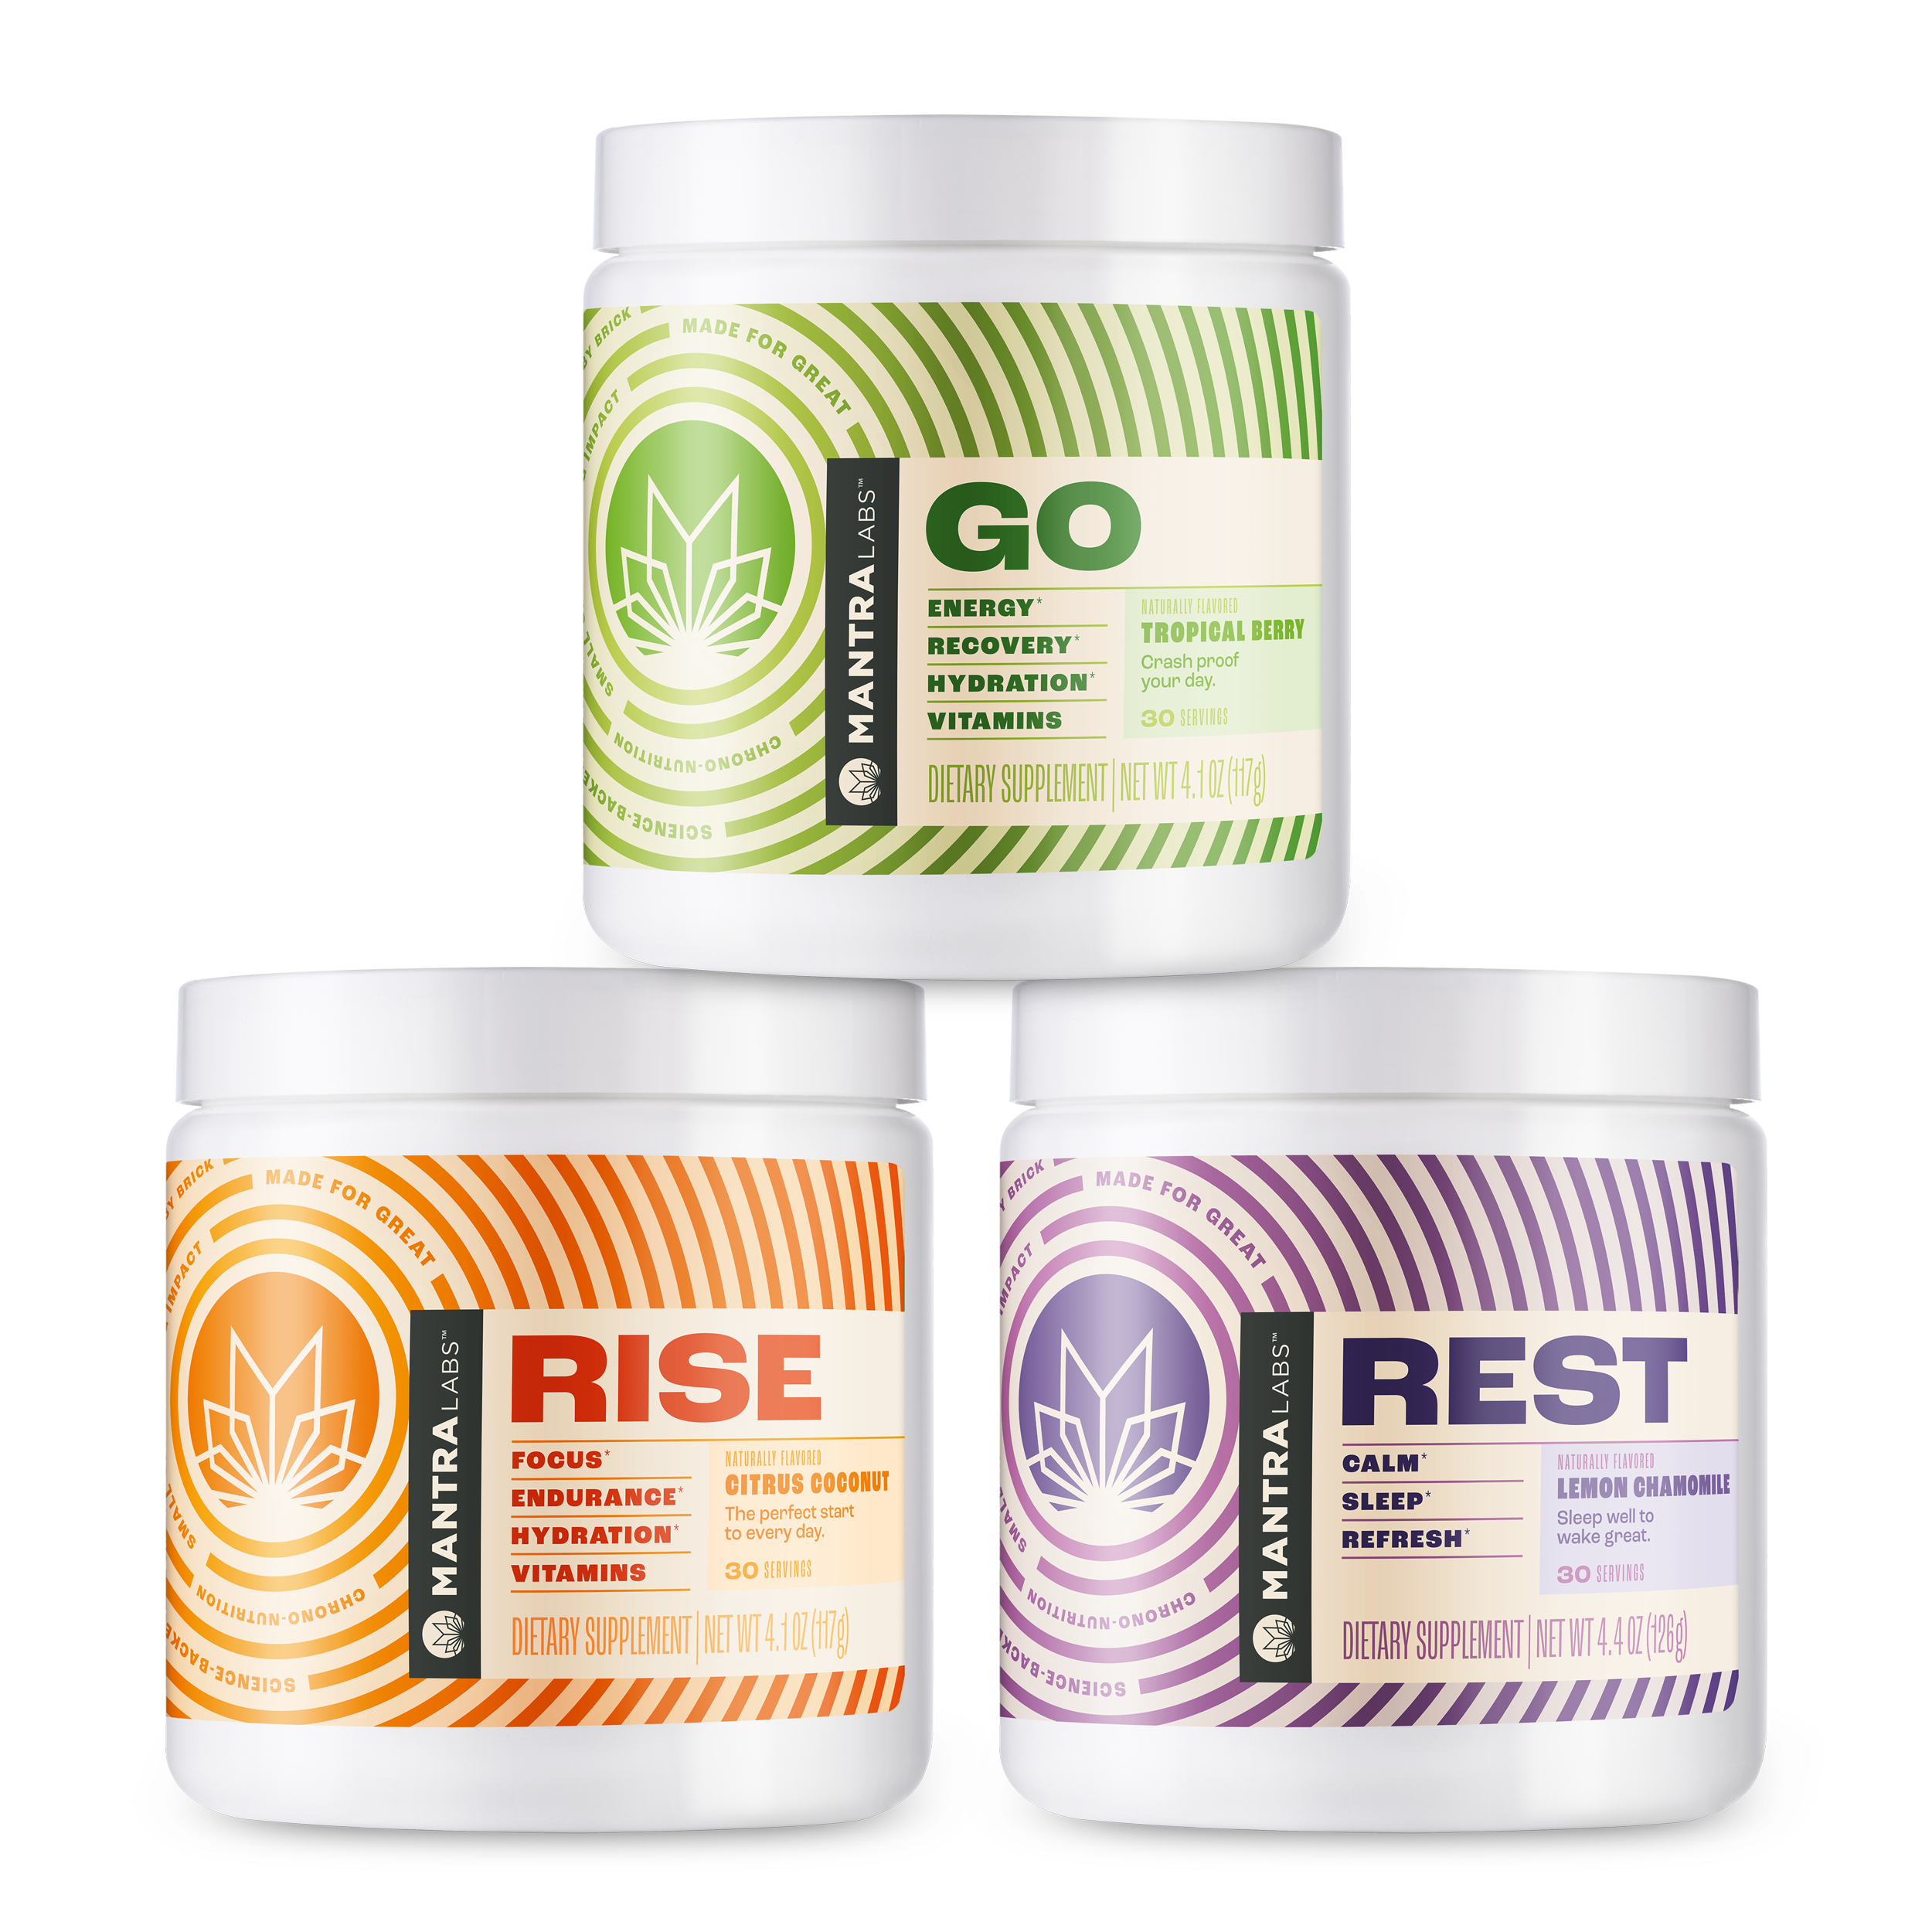 Supplements of GO, REST, and RISE stacked into a pyramid.